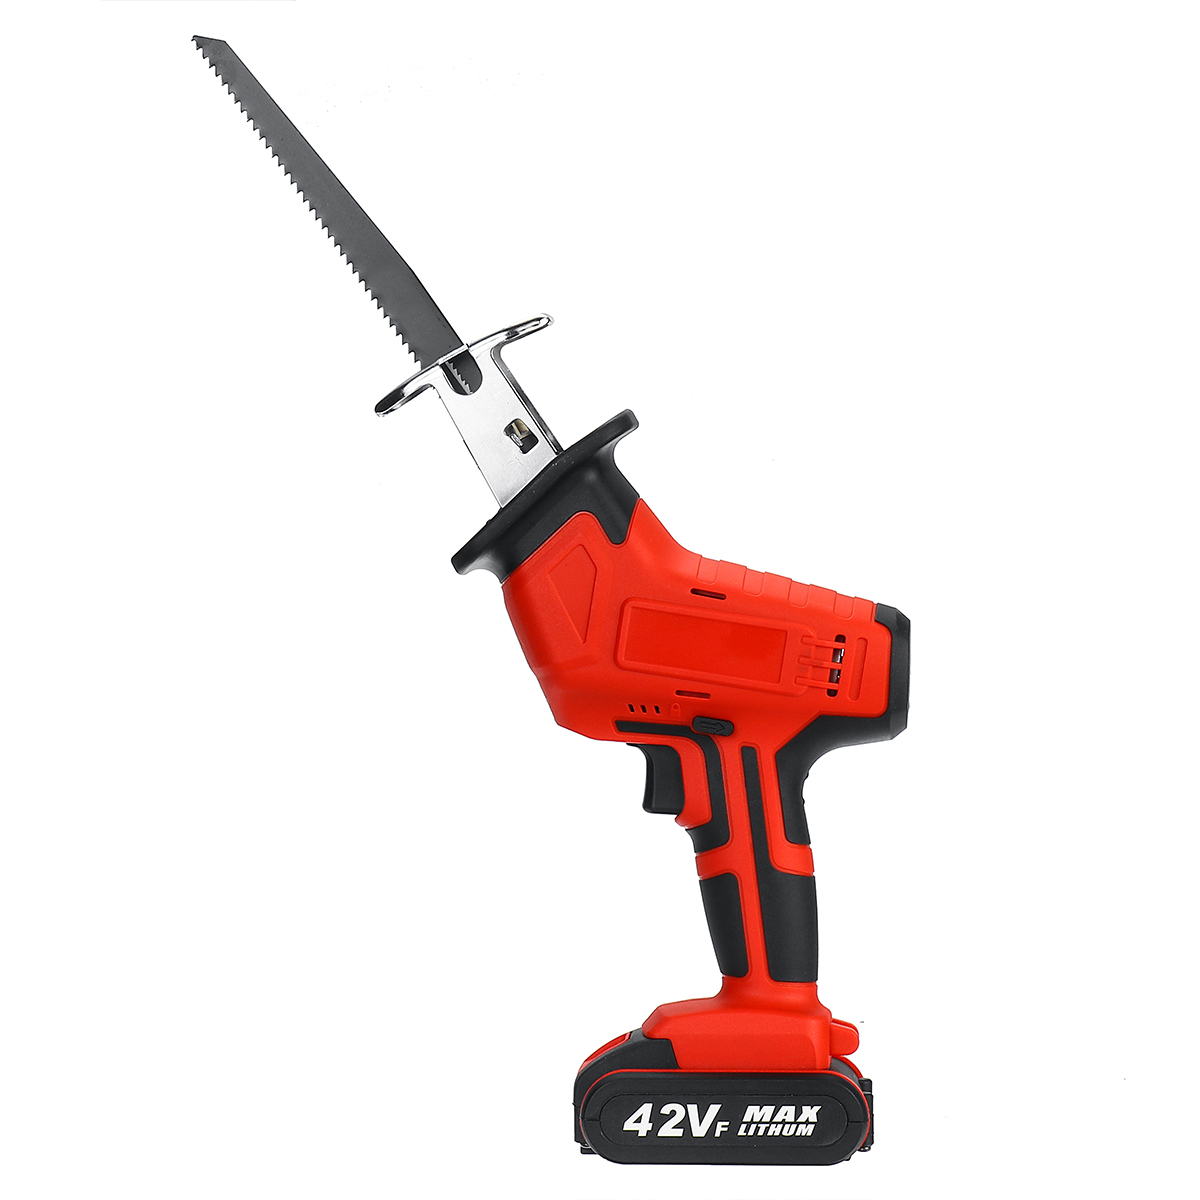 42V-1400W-Electric-Cordless-Reciprocating-Saw-Outdoor-Woodworking-W-2-Battery-1713373-6